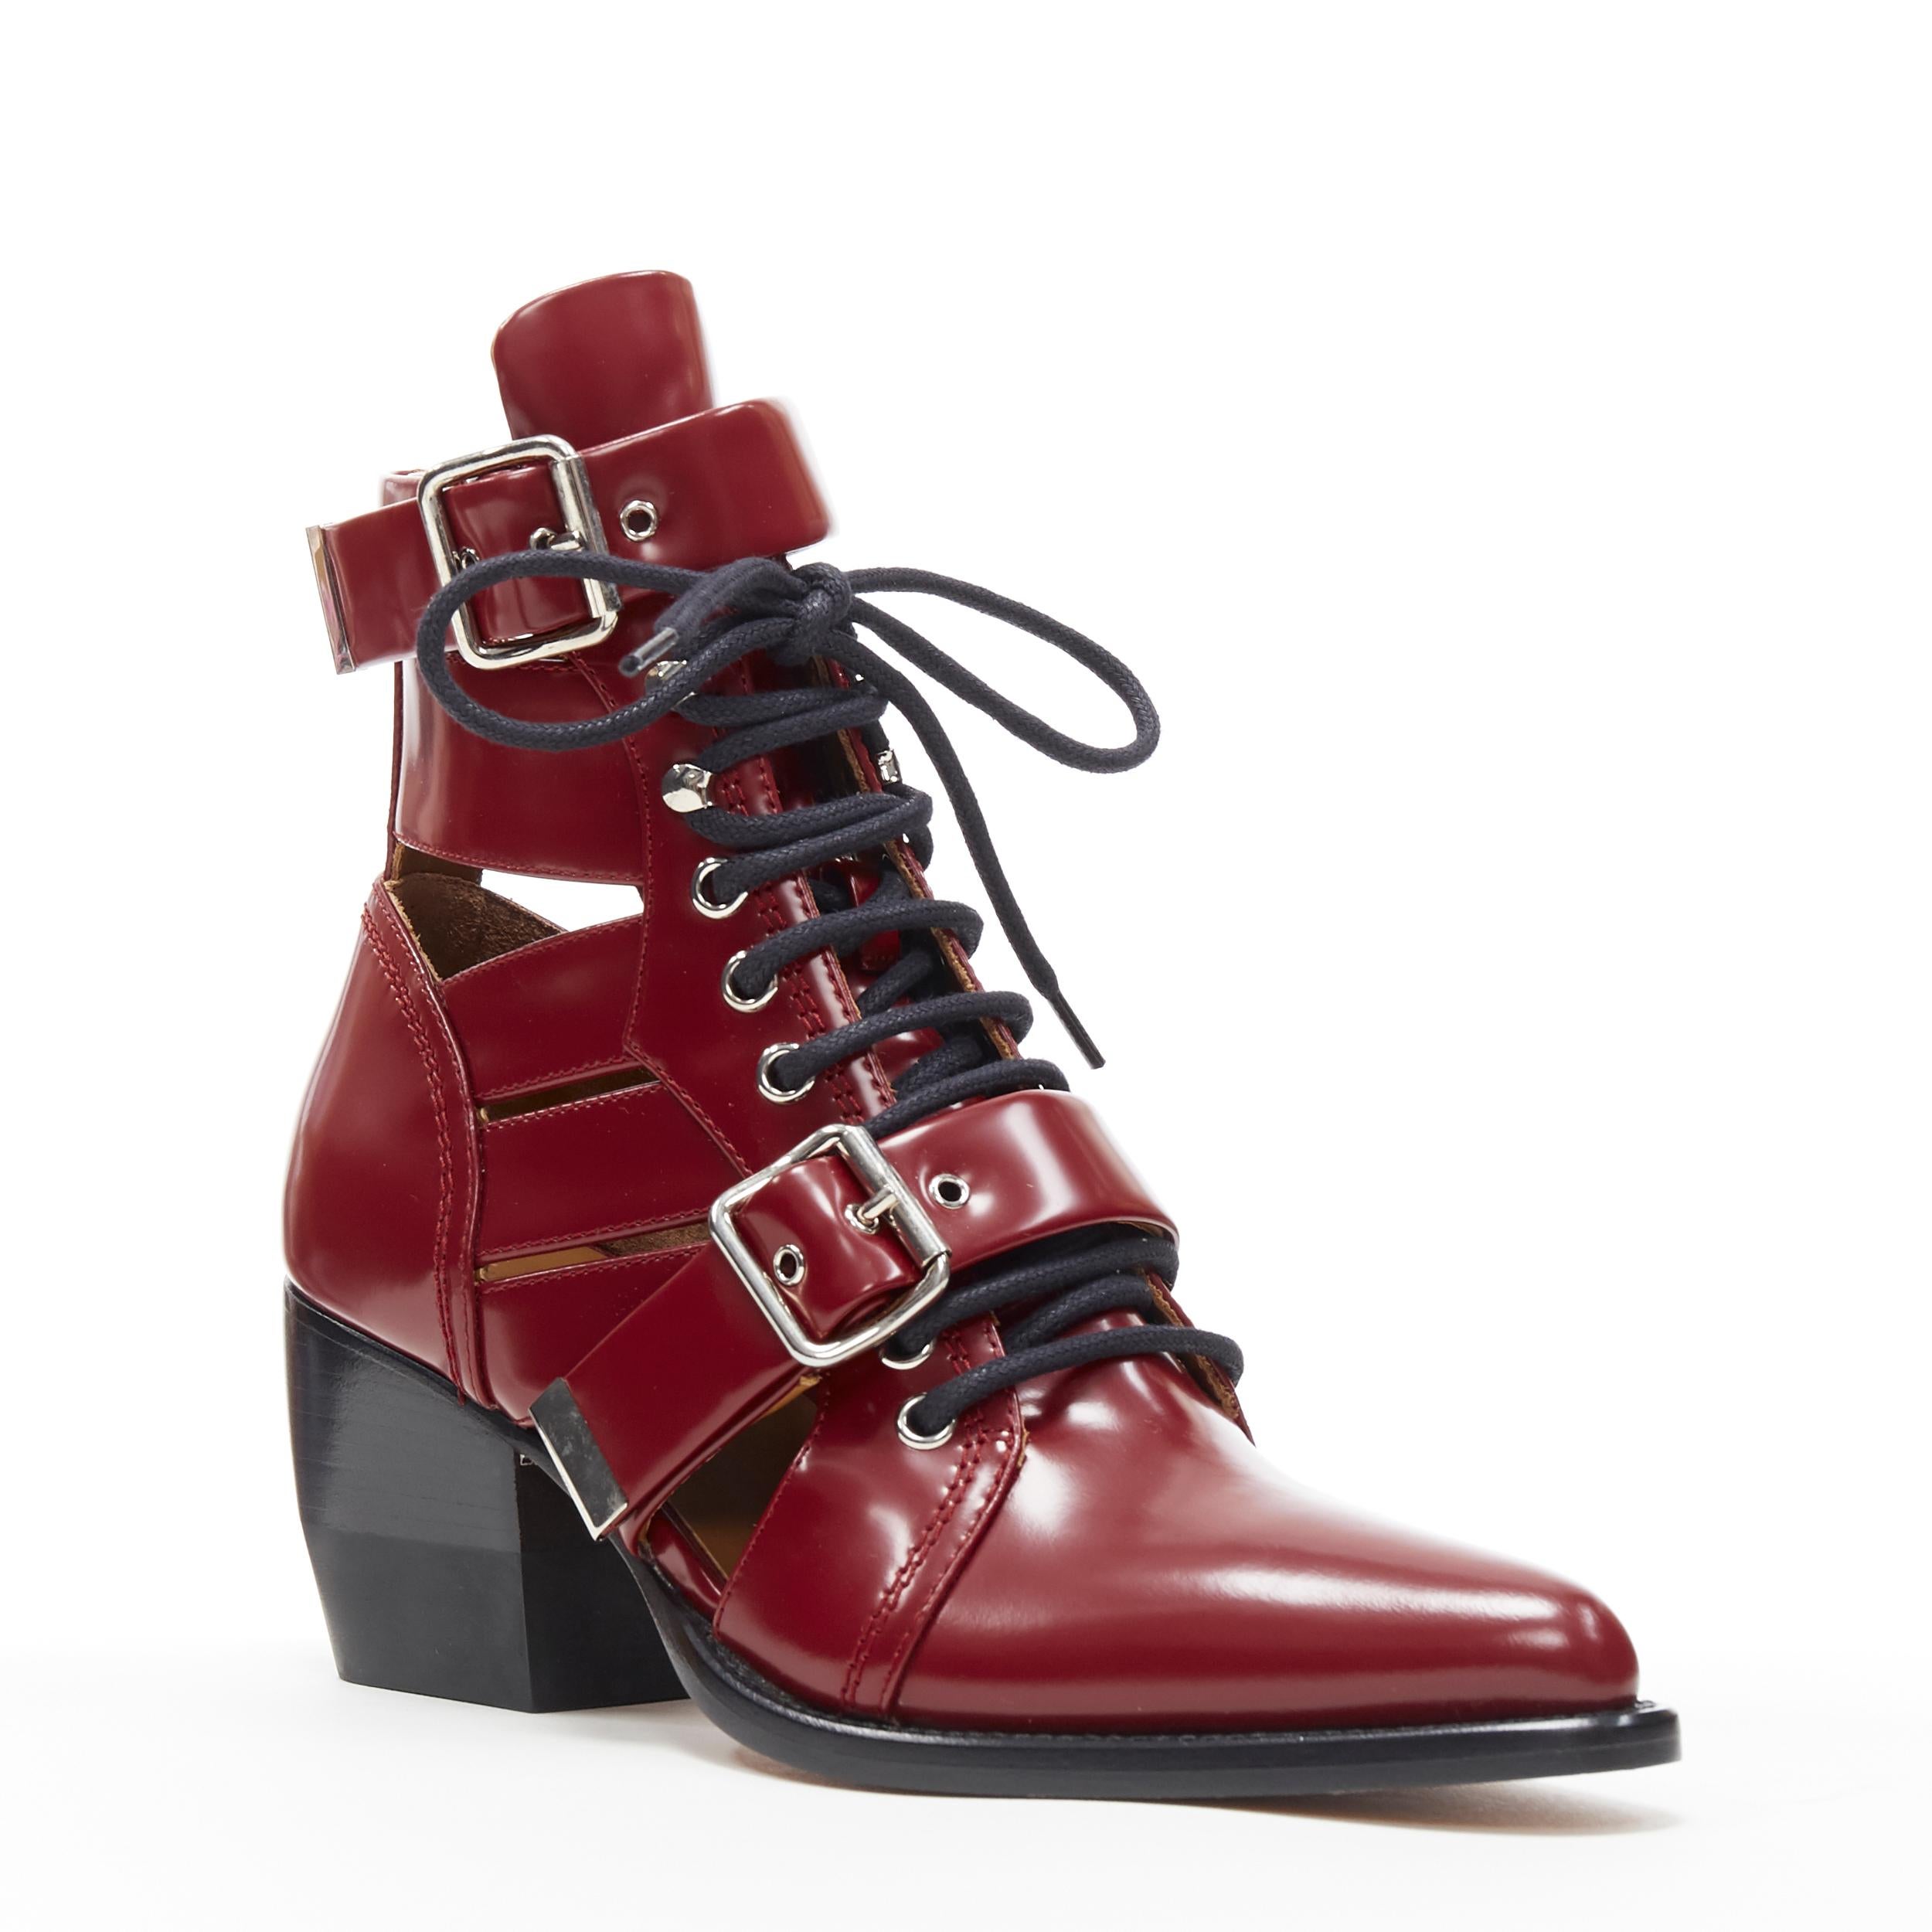 new CHLOE Rylee burgundy red leather cut out buckled pointy ankle boot EU38.5
Brand: Chloe
Model Name / Style: Rylee
Material: Leather
Color: Burgundy
Pattern: Solid
Closure: Lace up
Extra Detail: Signature Rylee boots by Chloe. Runway style. Ankle